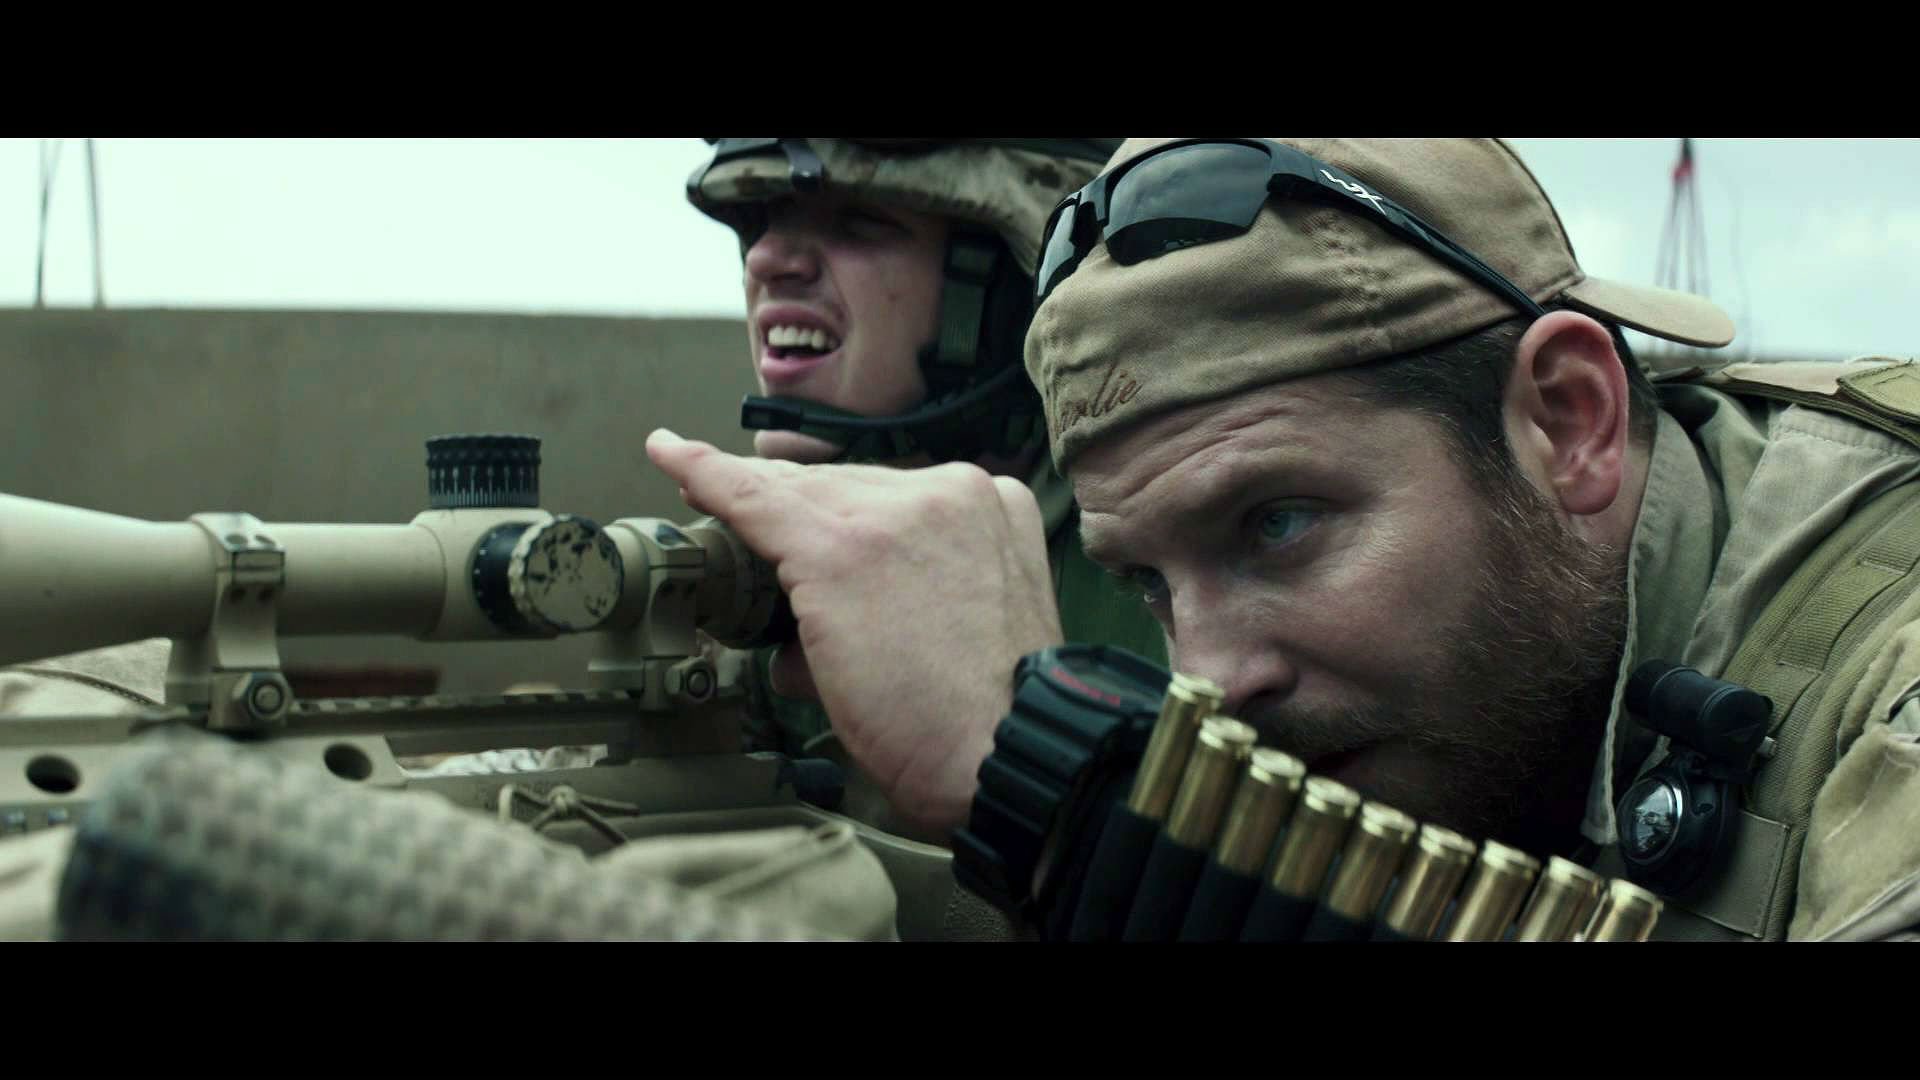 american, Sniper, Biography, Action, Military, Warrior, Soldier, 1americansniper, Clint, Eastwood, War, Fighting, Weapon, Gun Wallpaper